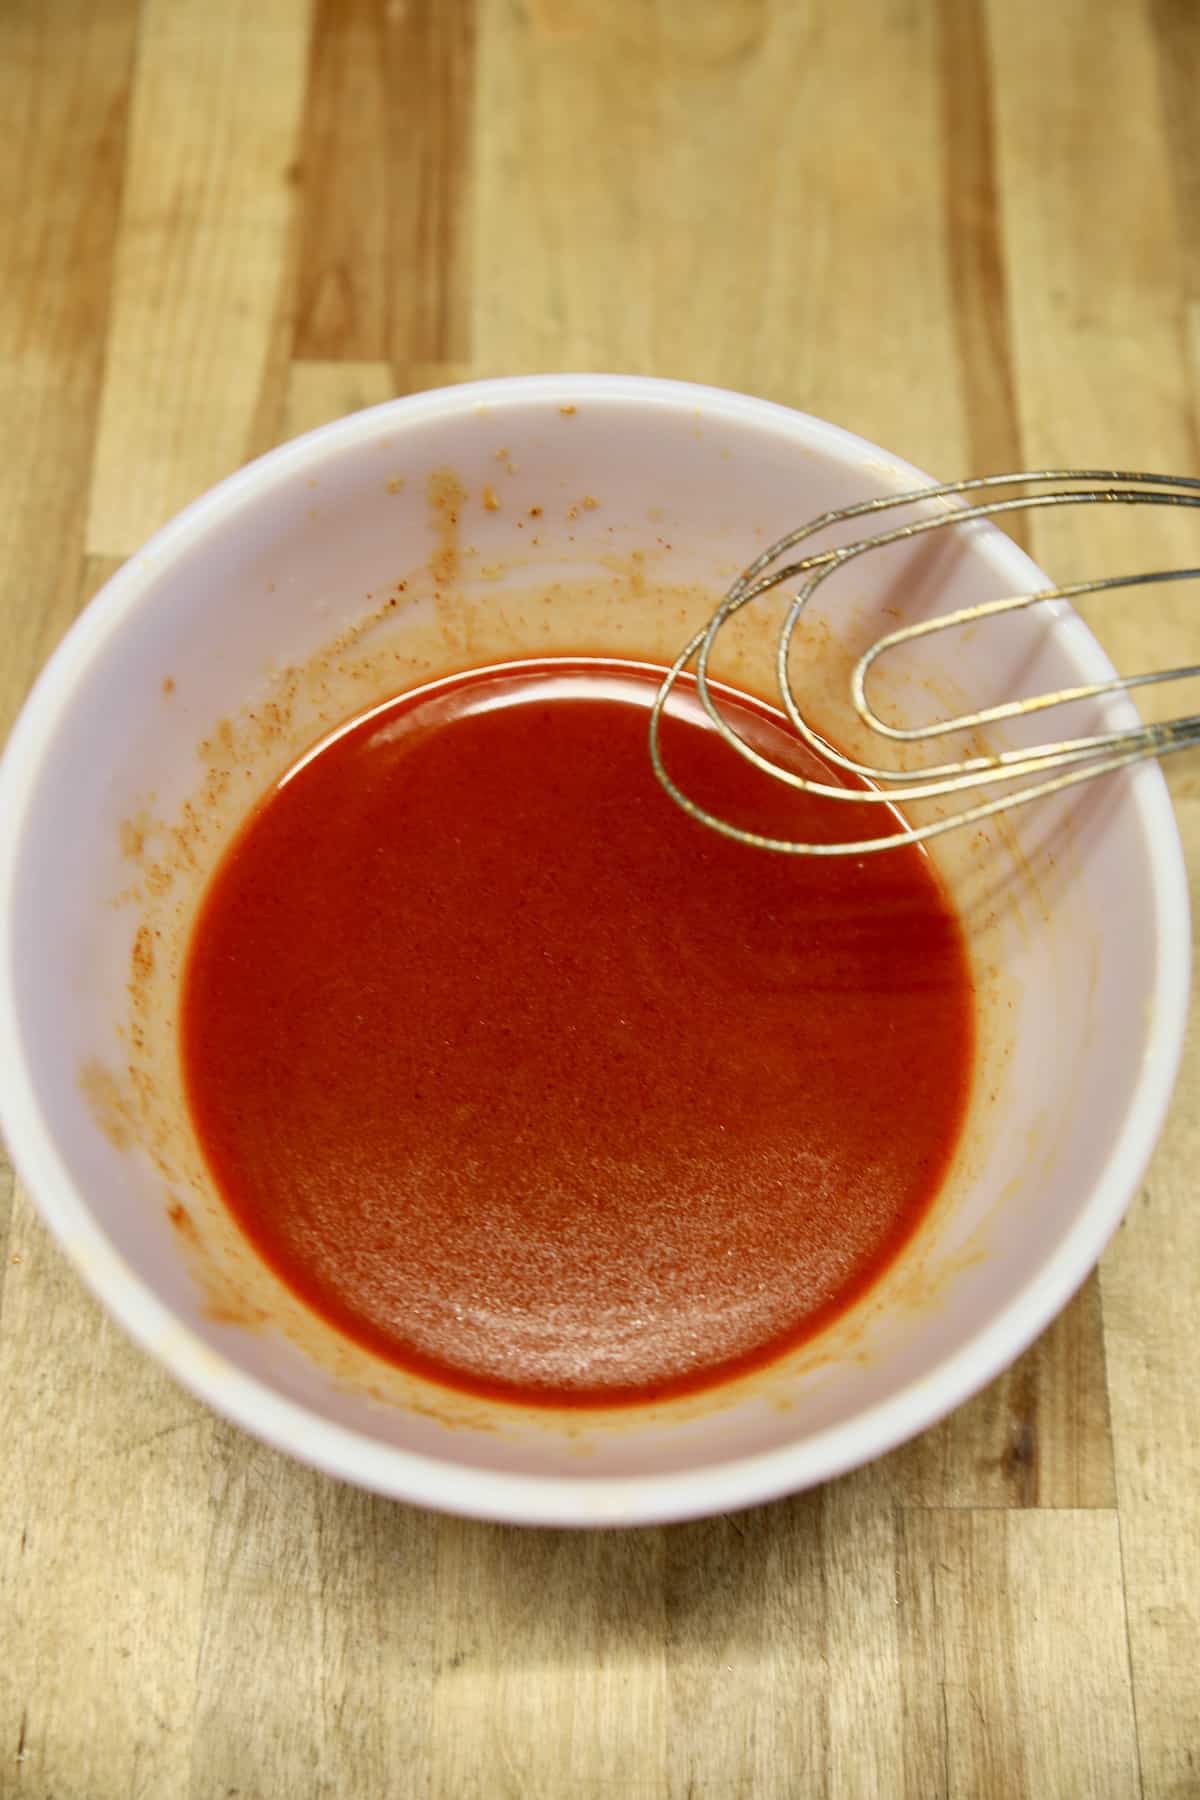 Buffalo sauce in a bowl with whisk on side of bowl.